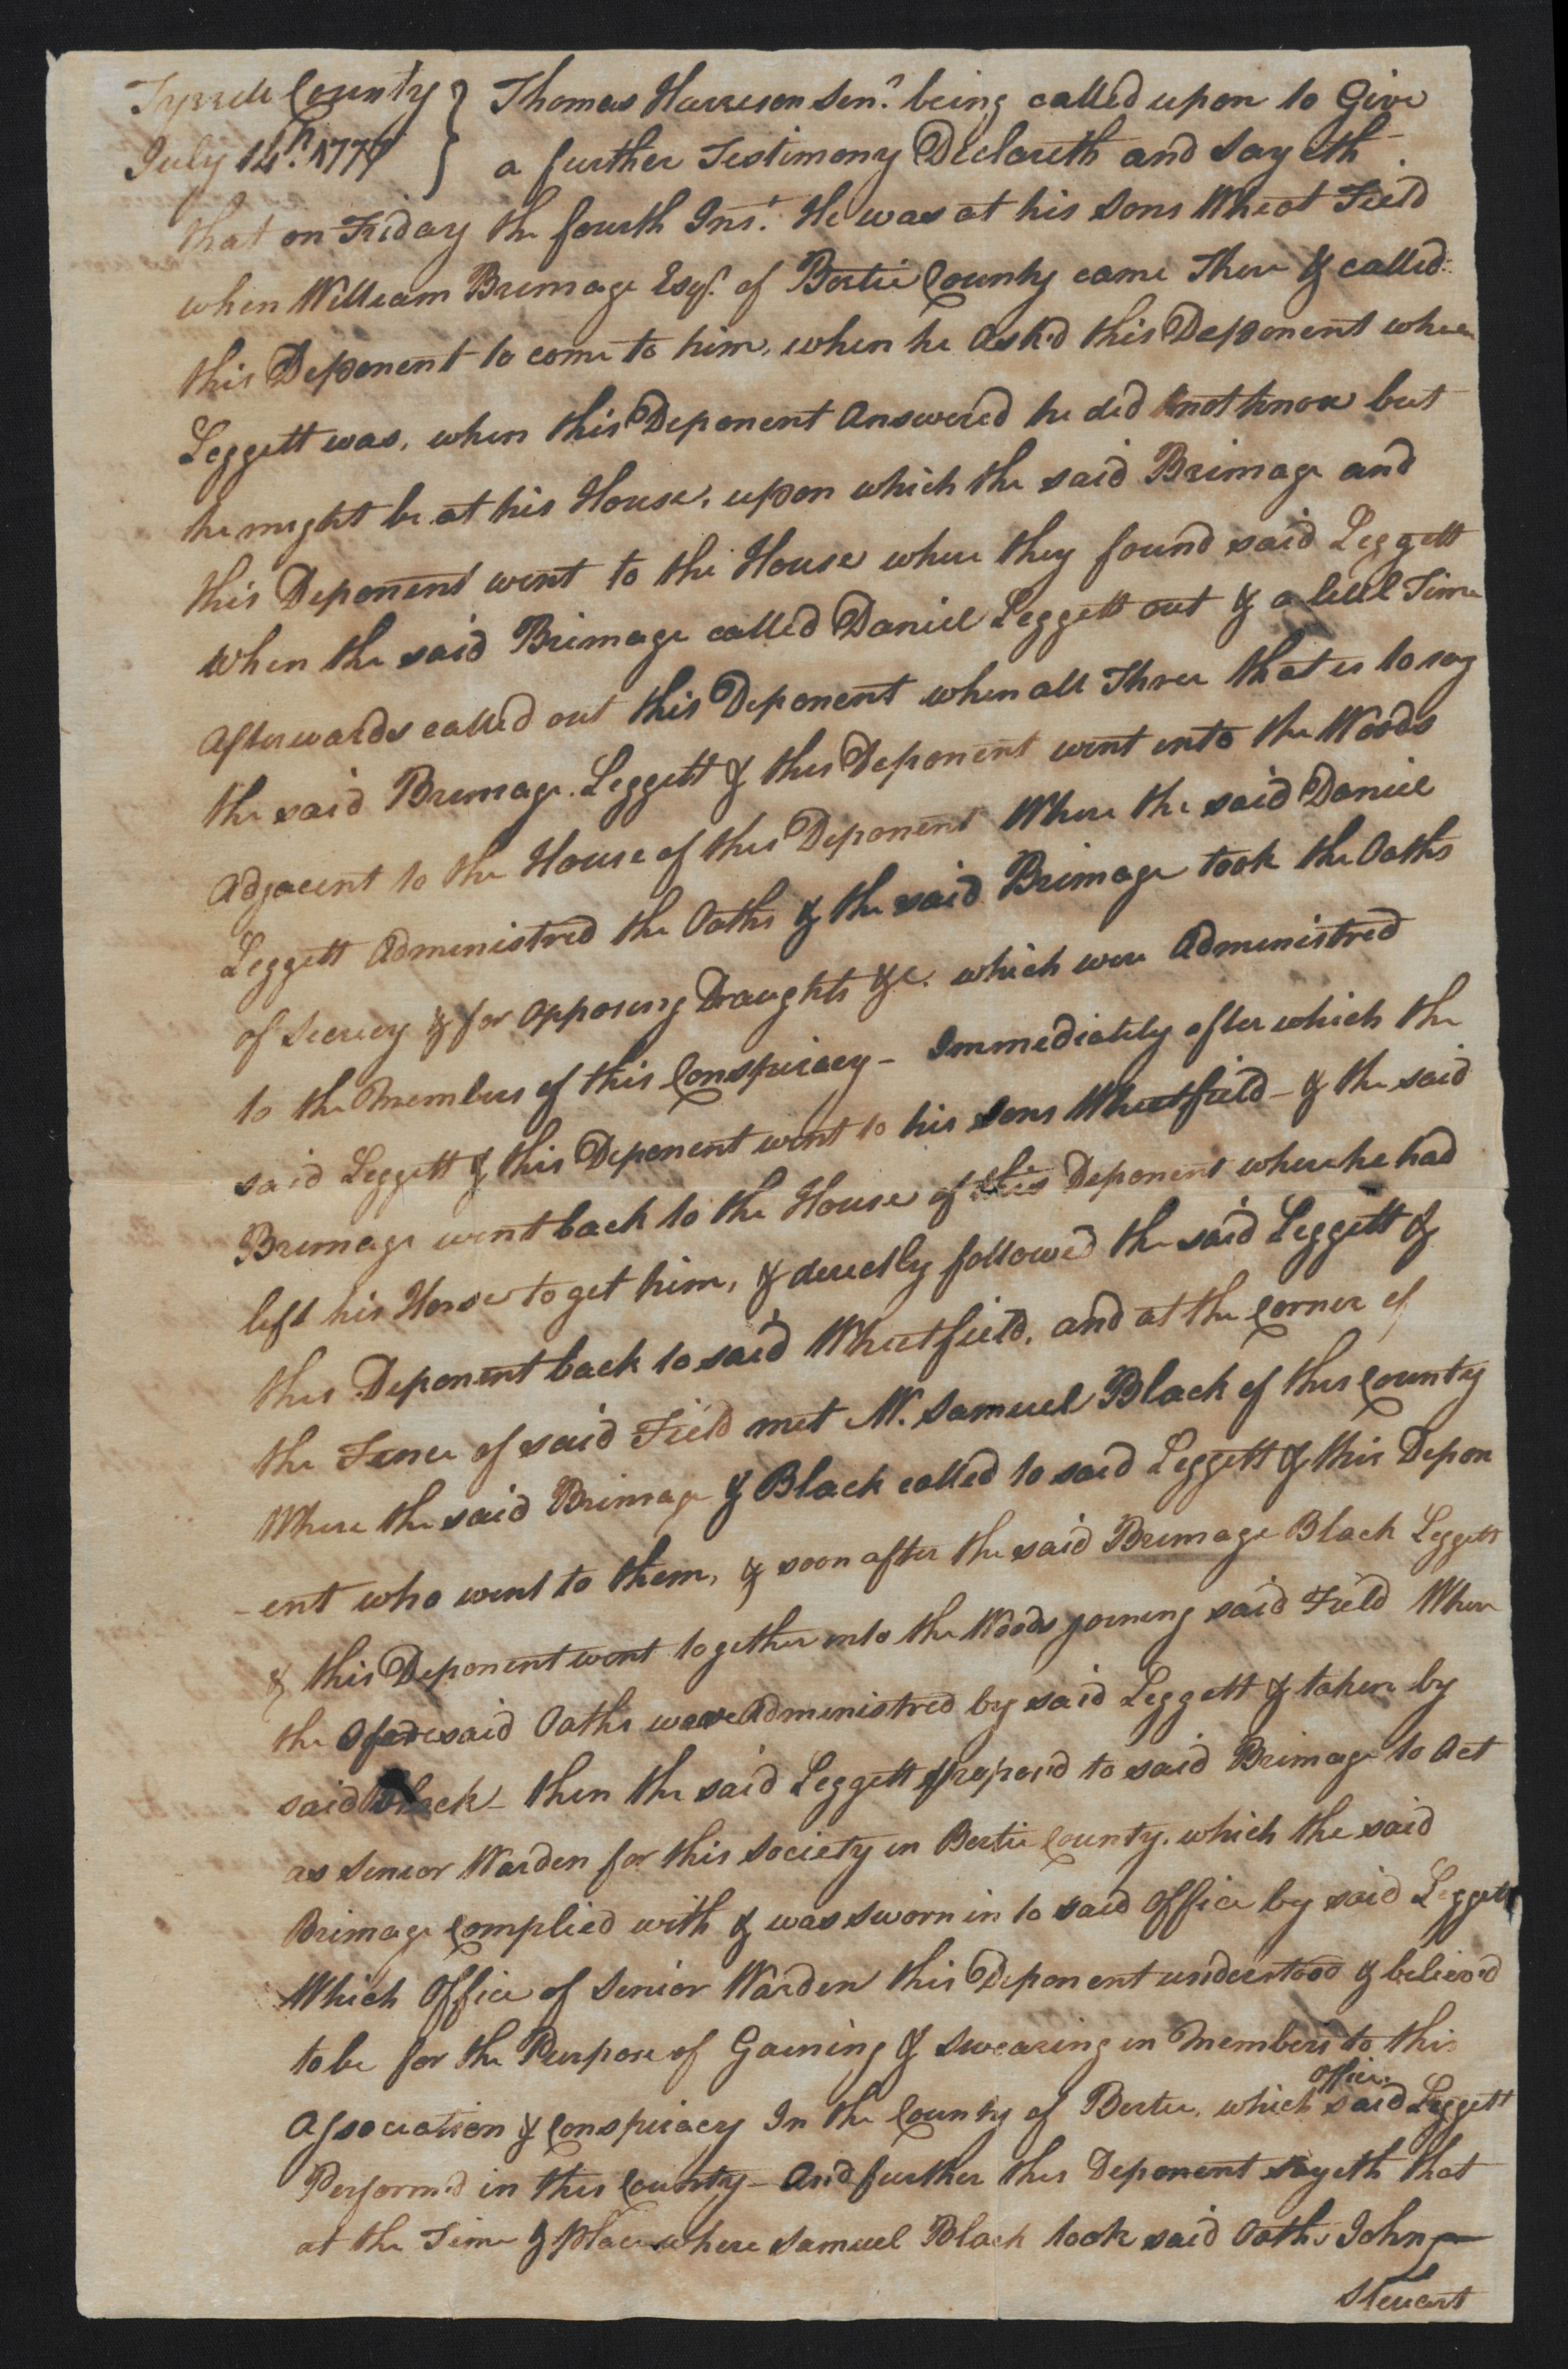 Deposition of Thomas Harrison Sr., 14 July 1777, page 1